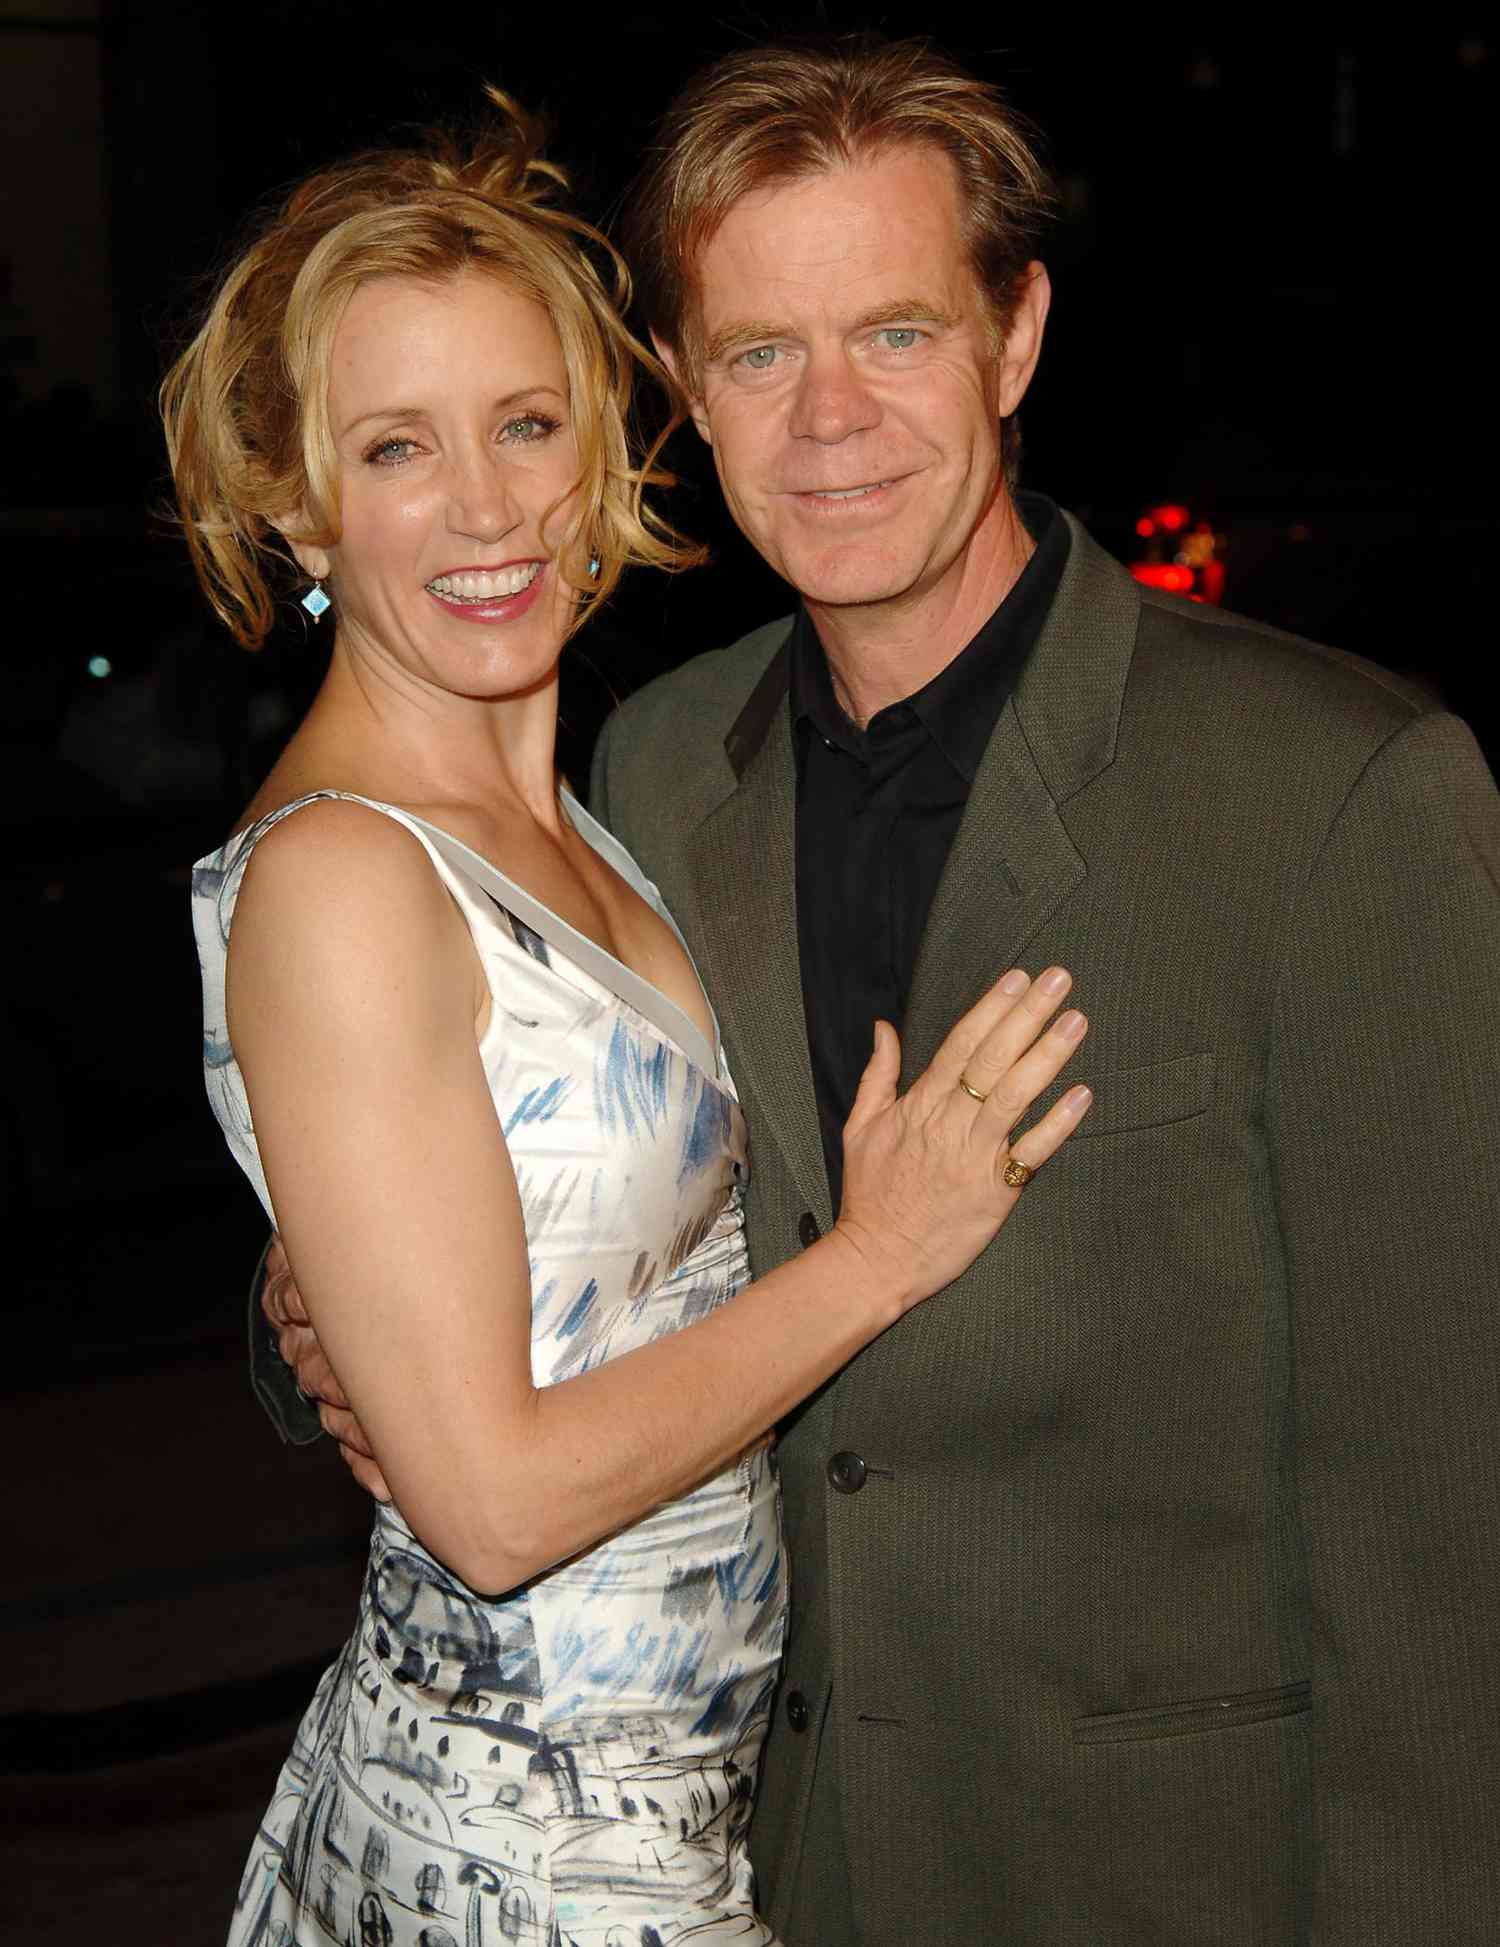 Felicity Huffman and William H. Macy at Sahara's&nbsp;Los Angeles Premiere on&nbsp;April 4, 2005